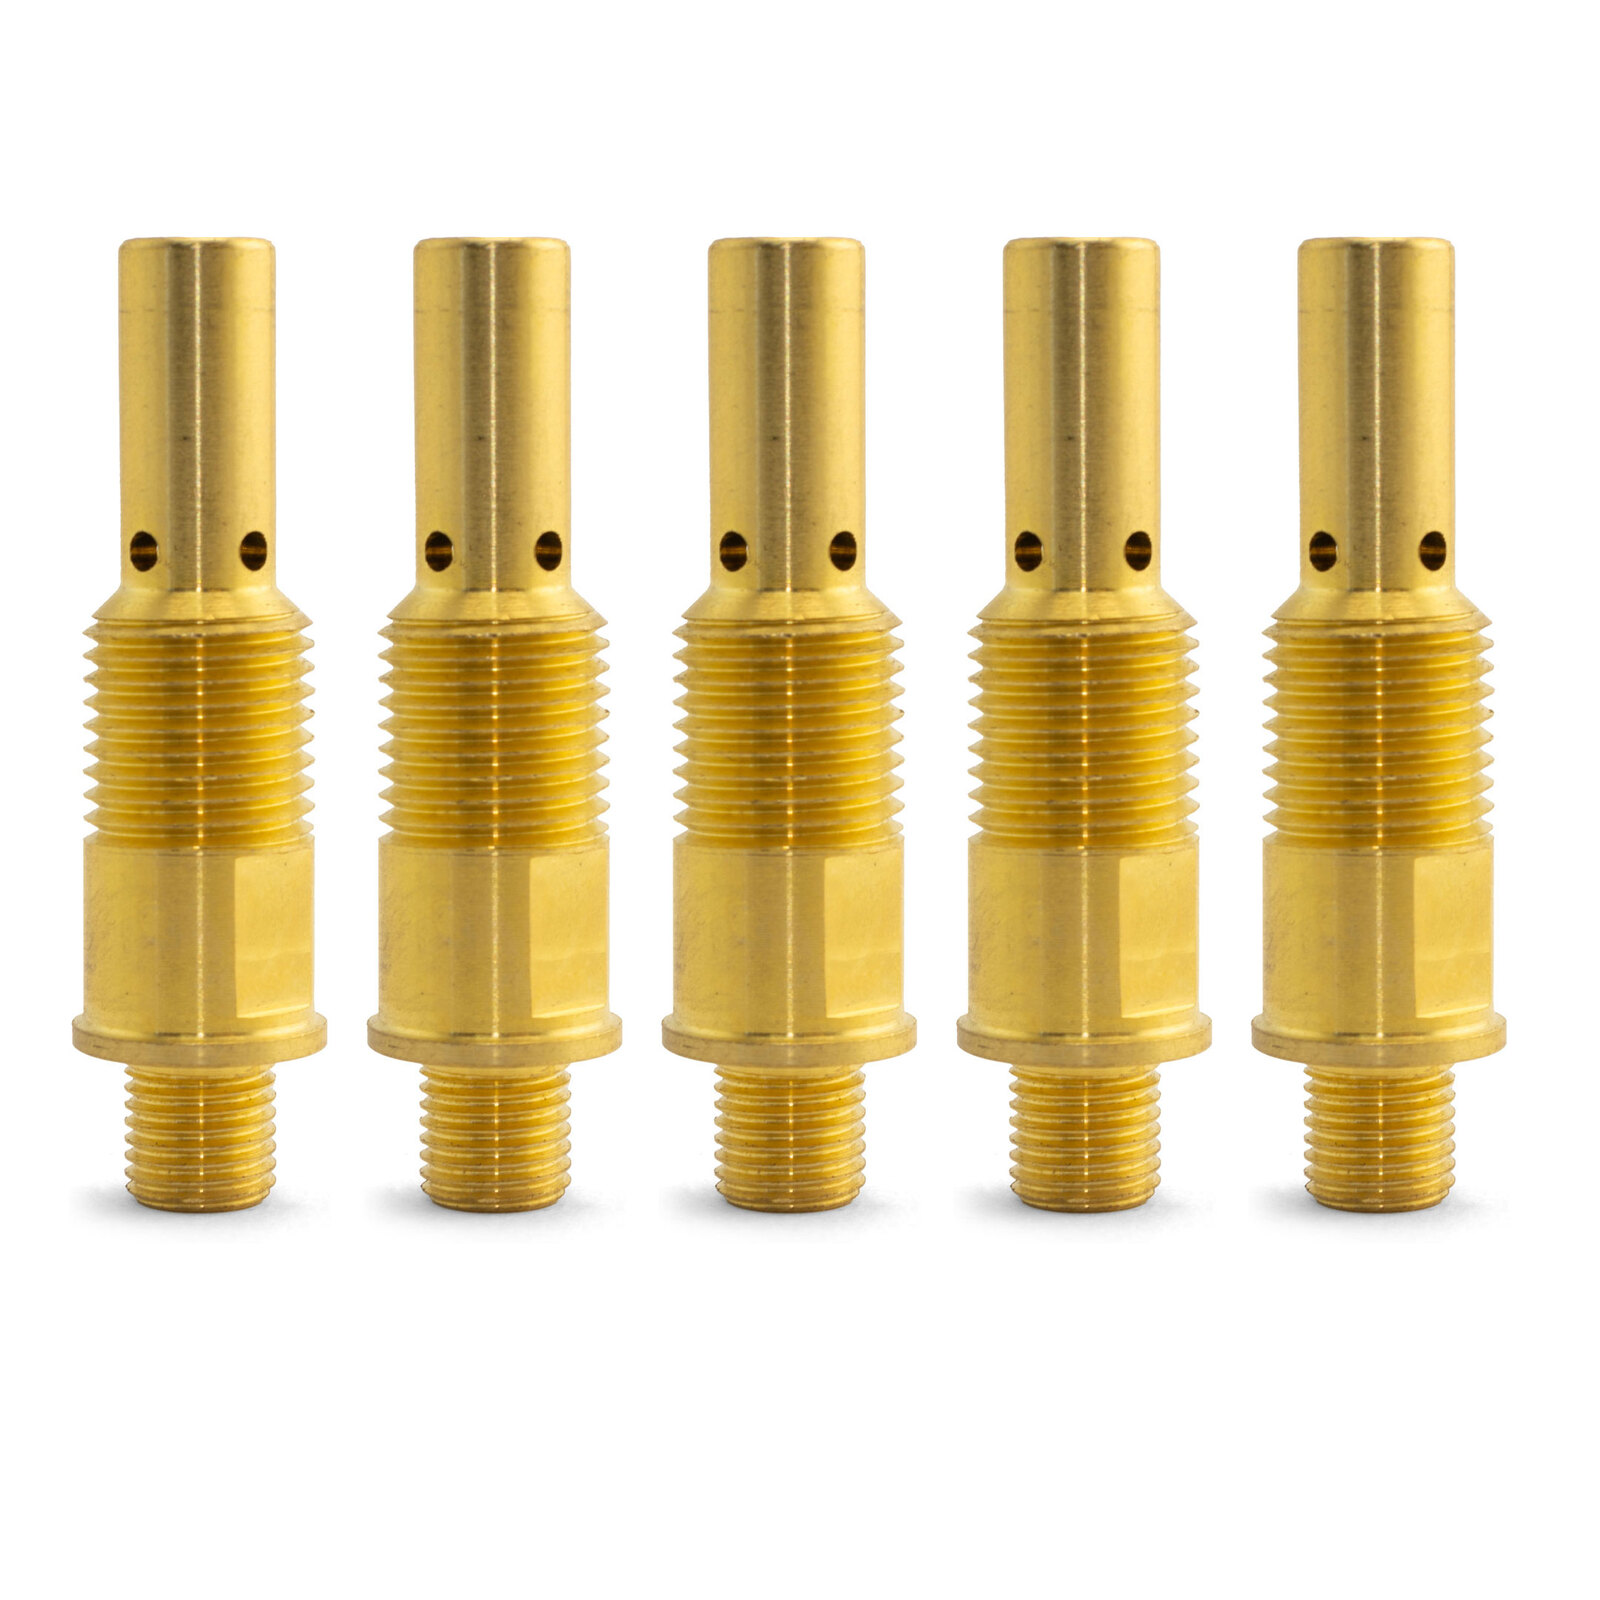 TWECO #2 Style fixed nozzle Gas Diffuser - 5 Pack - LONG LIFE 